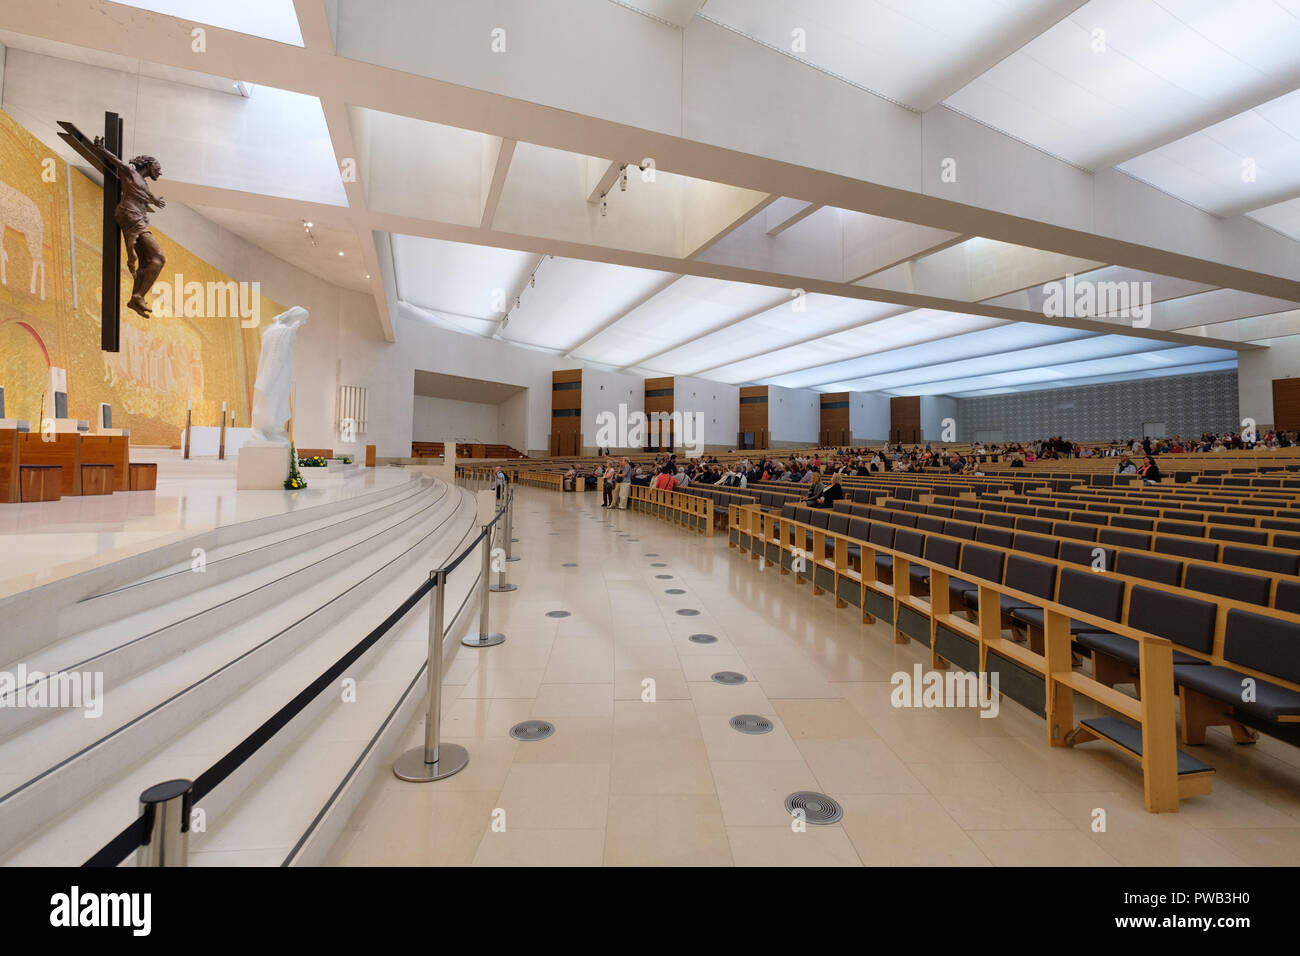 Interior view of the Basilica of the Holy Trinity at the Sanctuary of Our Lady of Fatima, in Fátima, Portugal, Europe Stock Photo